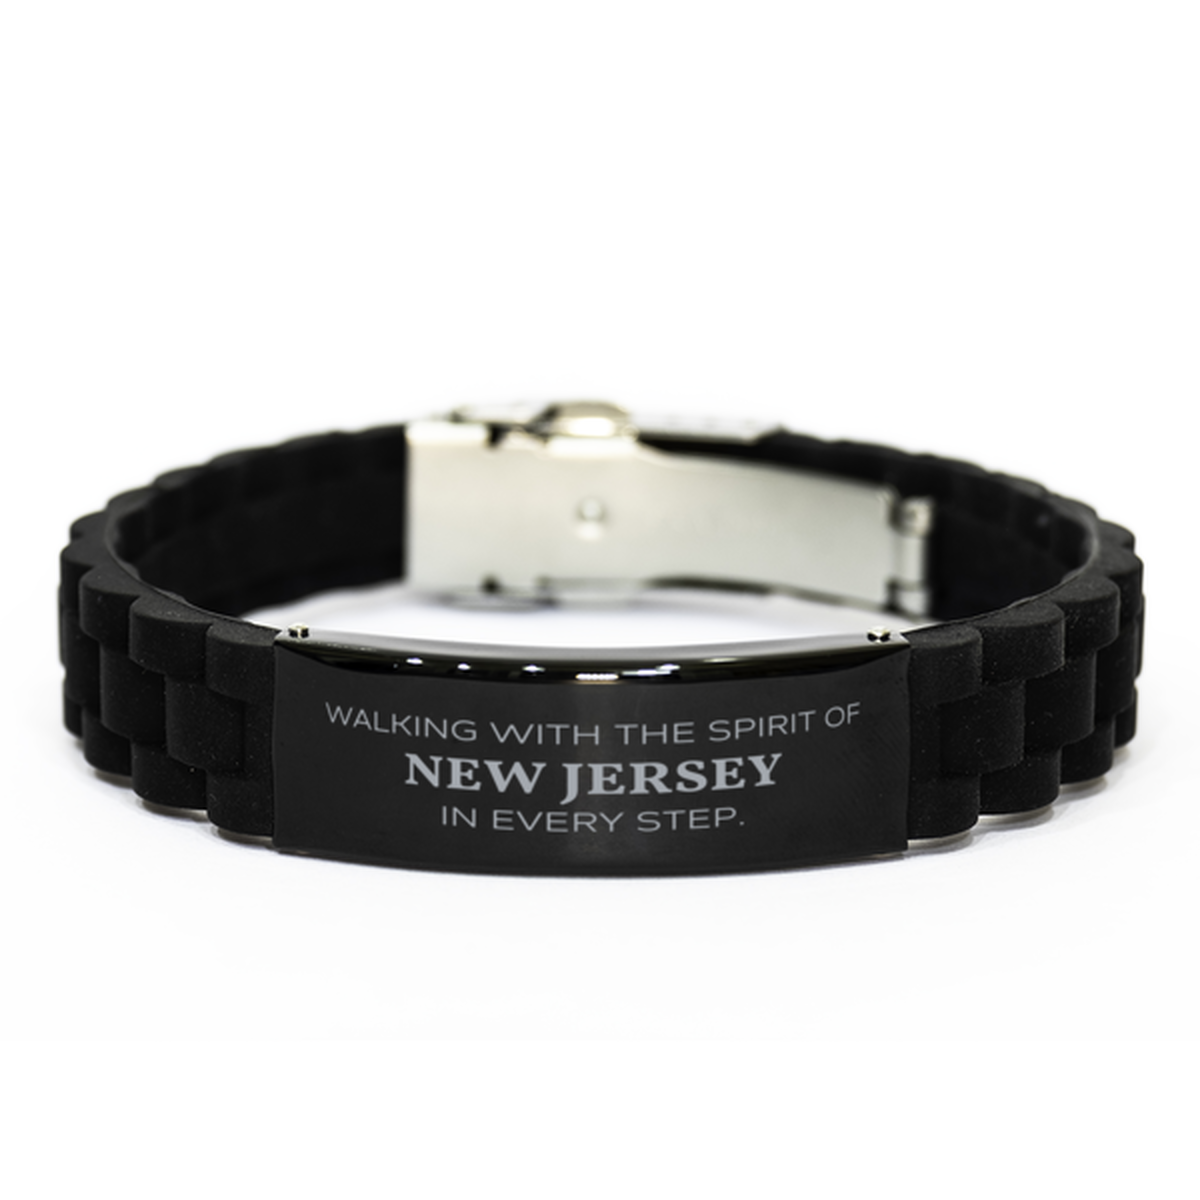 New Jersey Gifts, Walking with the spirit, Love New Jersey Birthday Christmas Black Glidelock Clasp Bracelet For New Jersey People, Men, Women, Friends